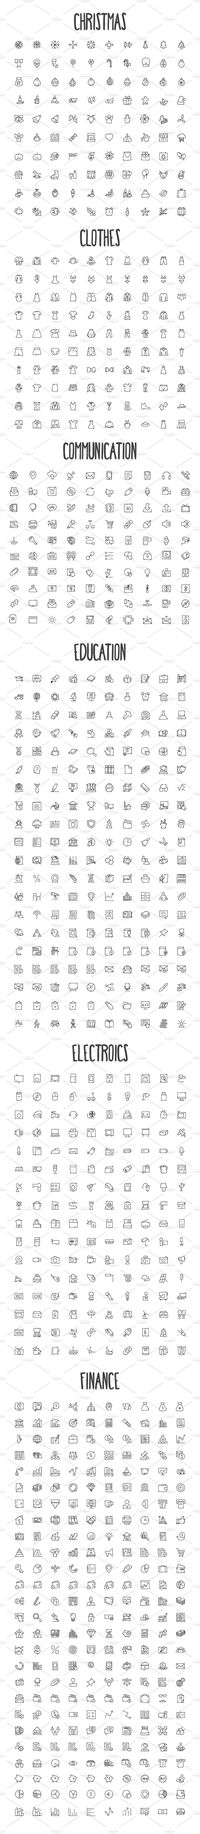 2440 Hand Drawn Doodle Icons Bundle by Creative Stall on @creativemarket